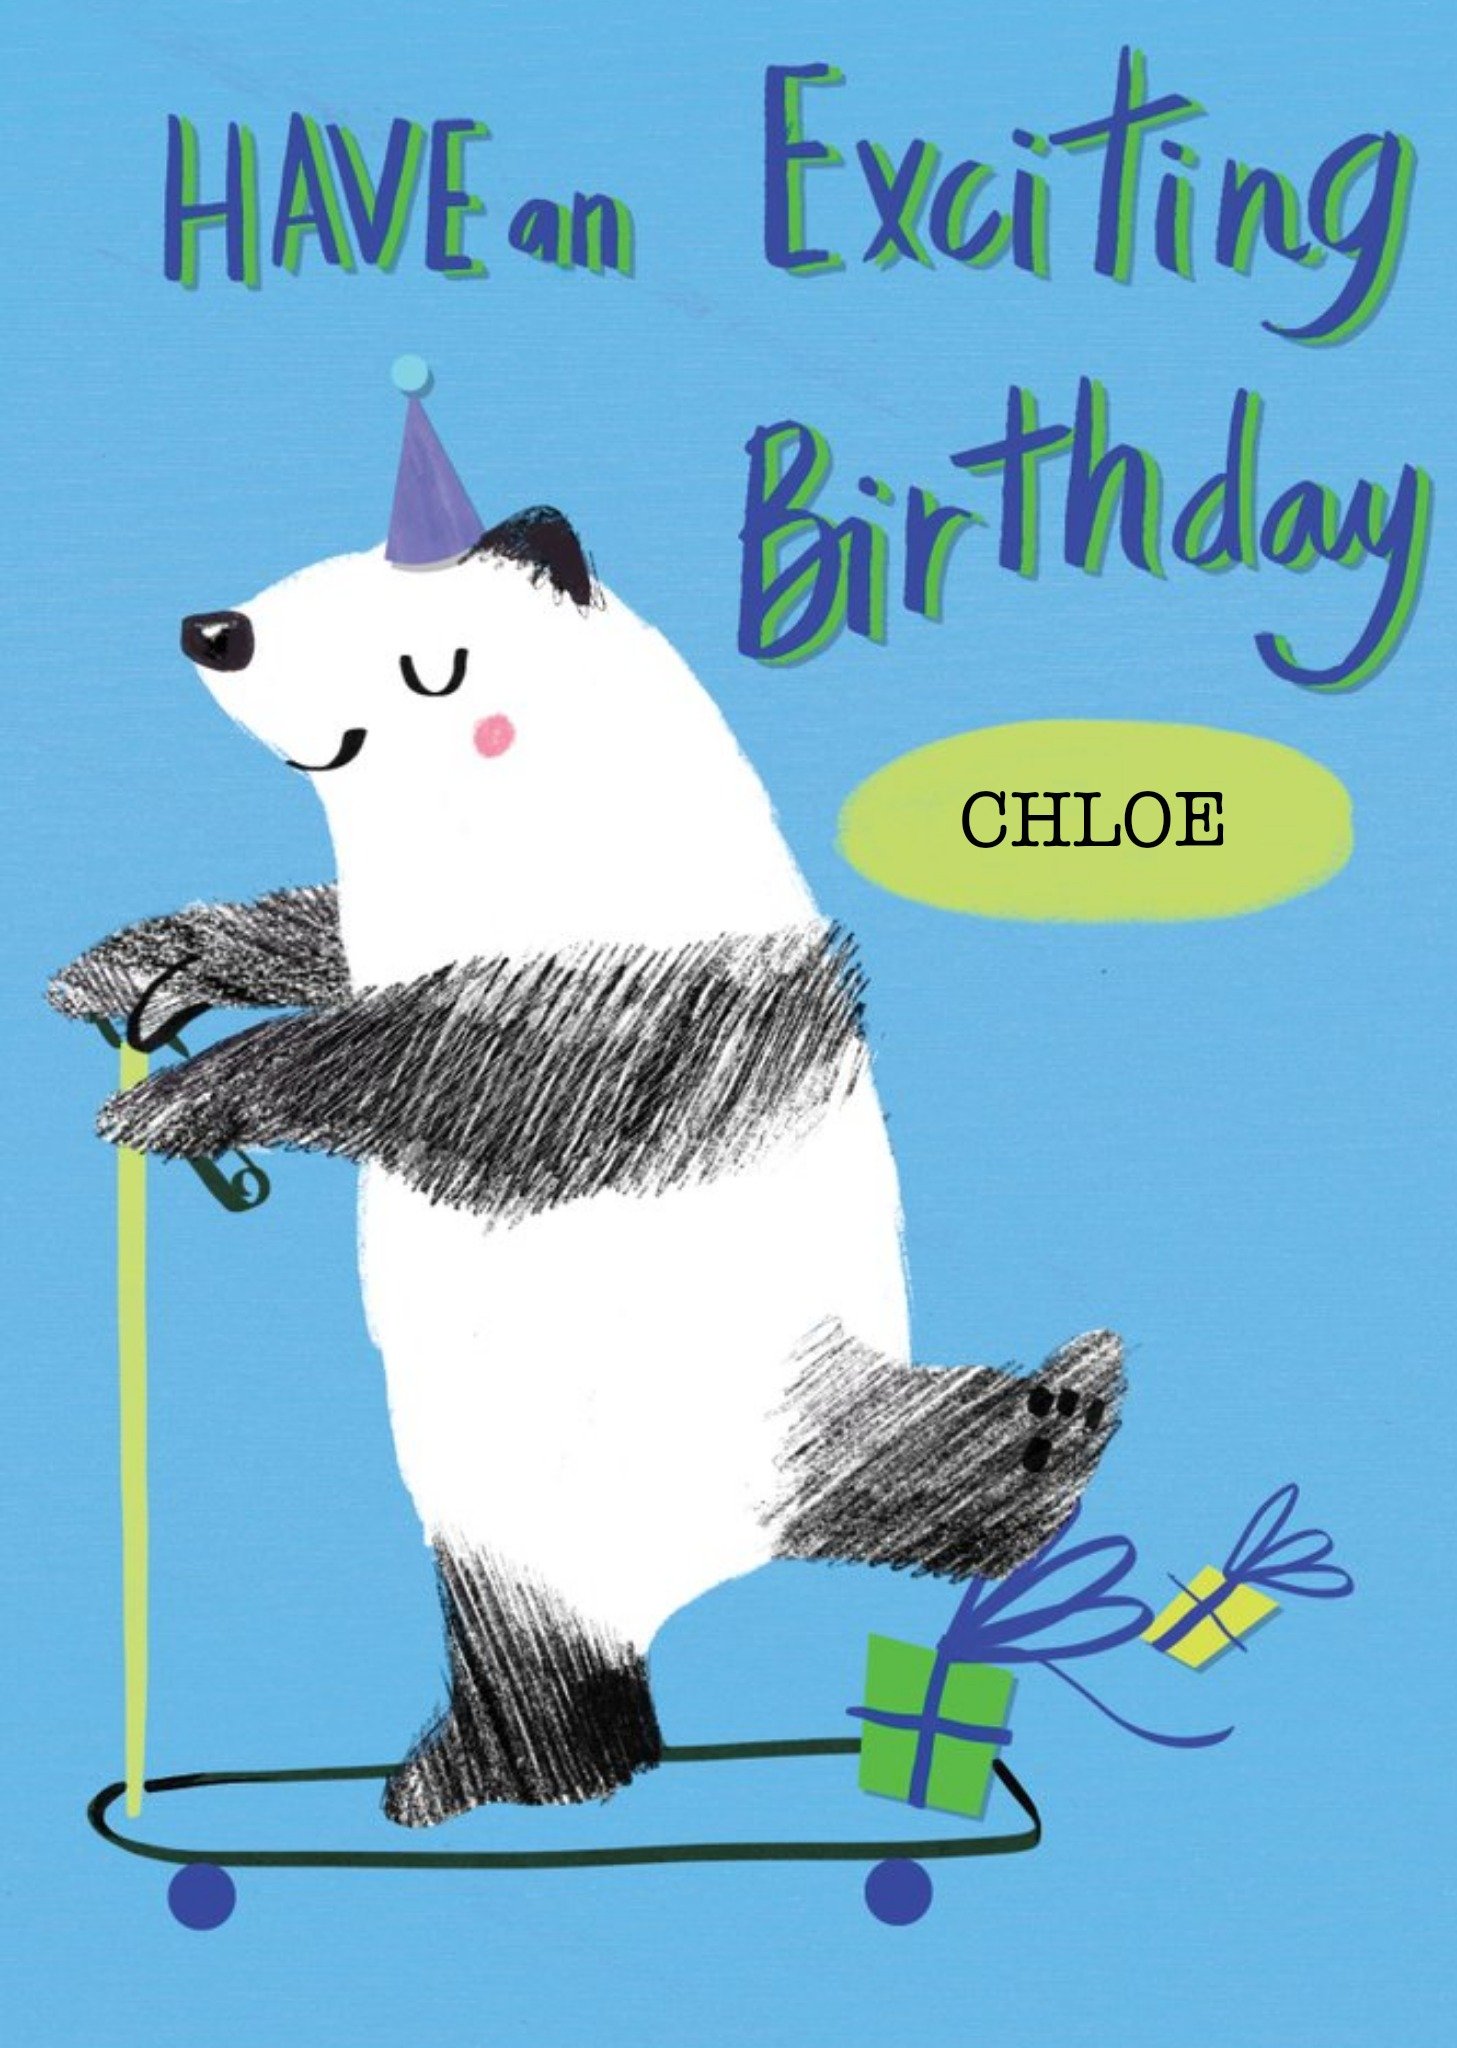 Moonpig Cool Illustration Of A Panda Riding A Scooter Birthday Card, Large